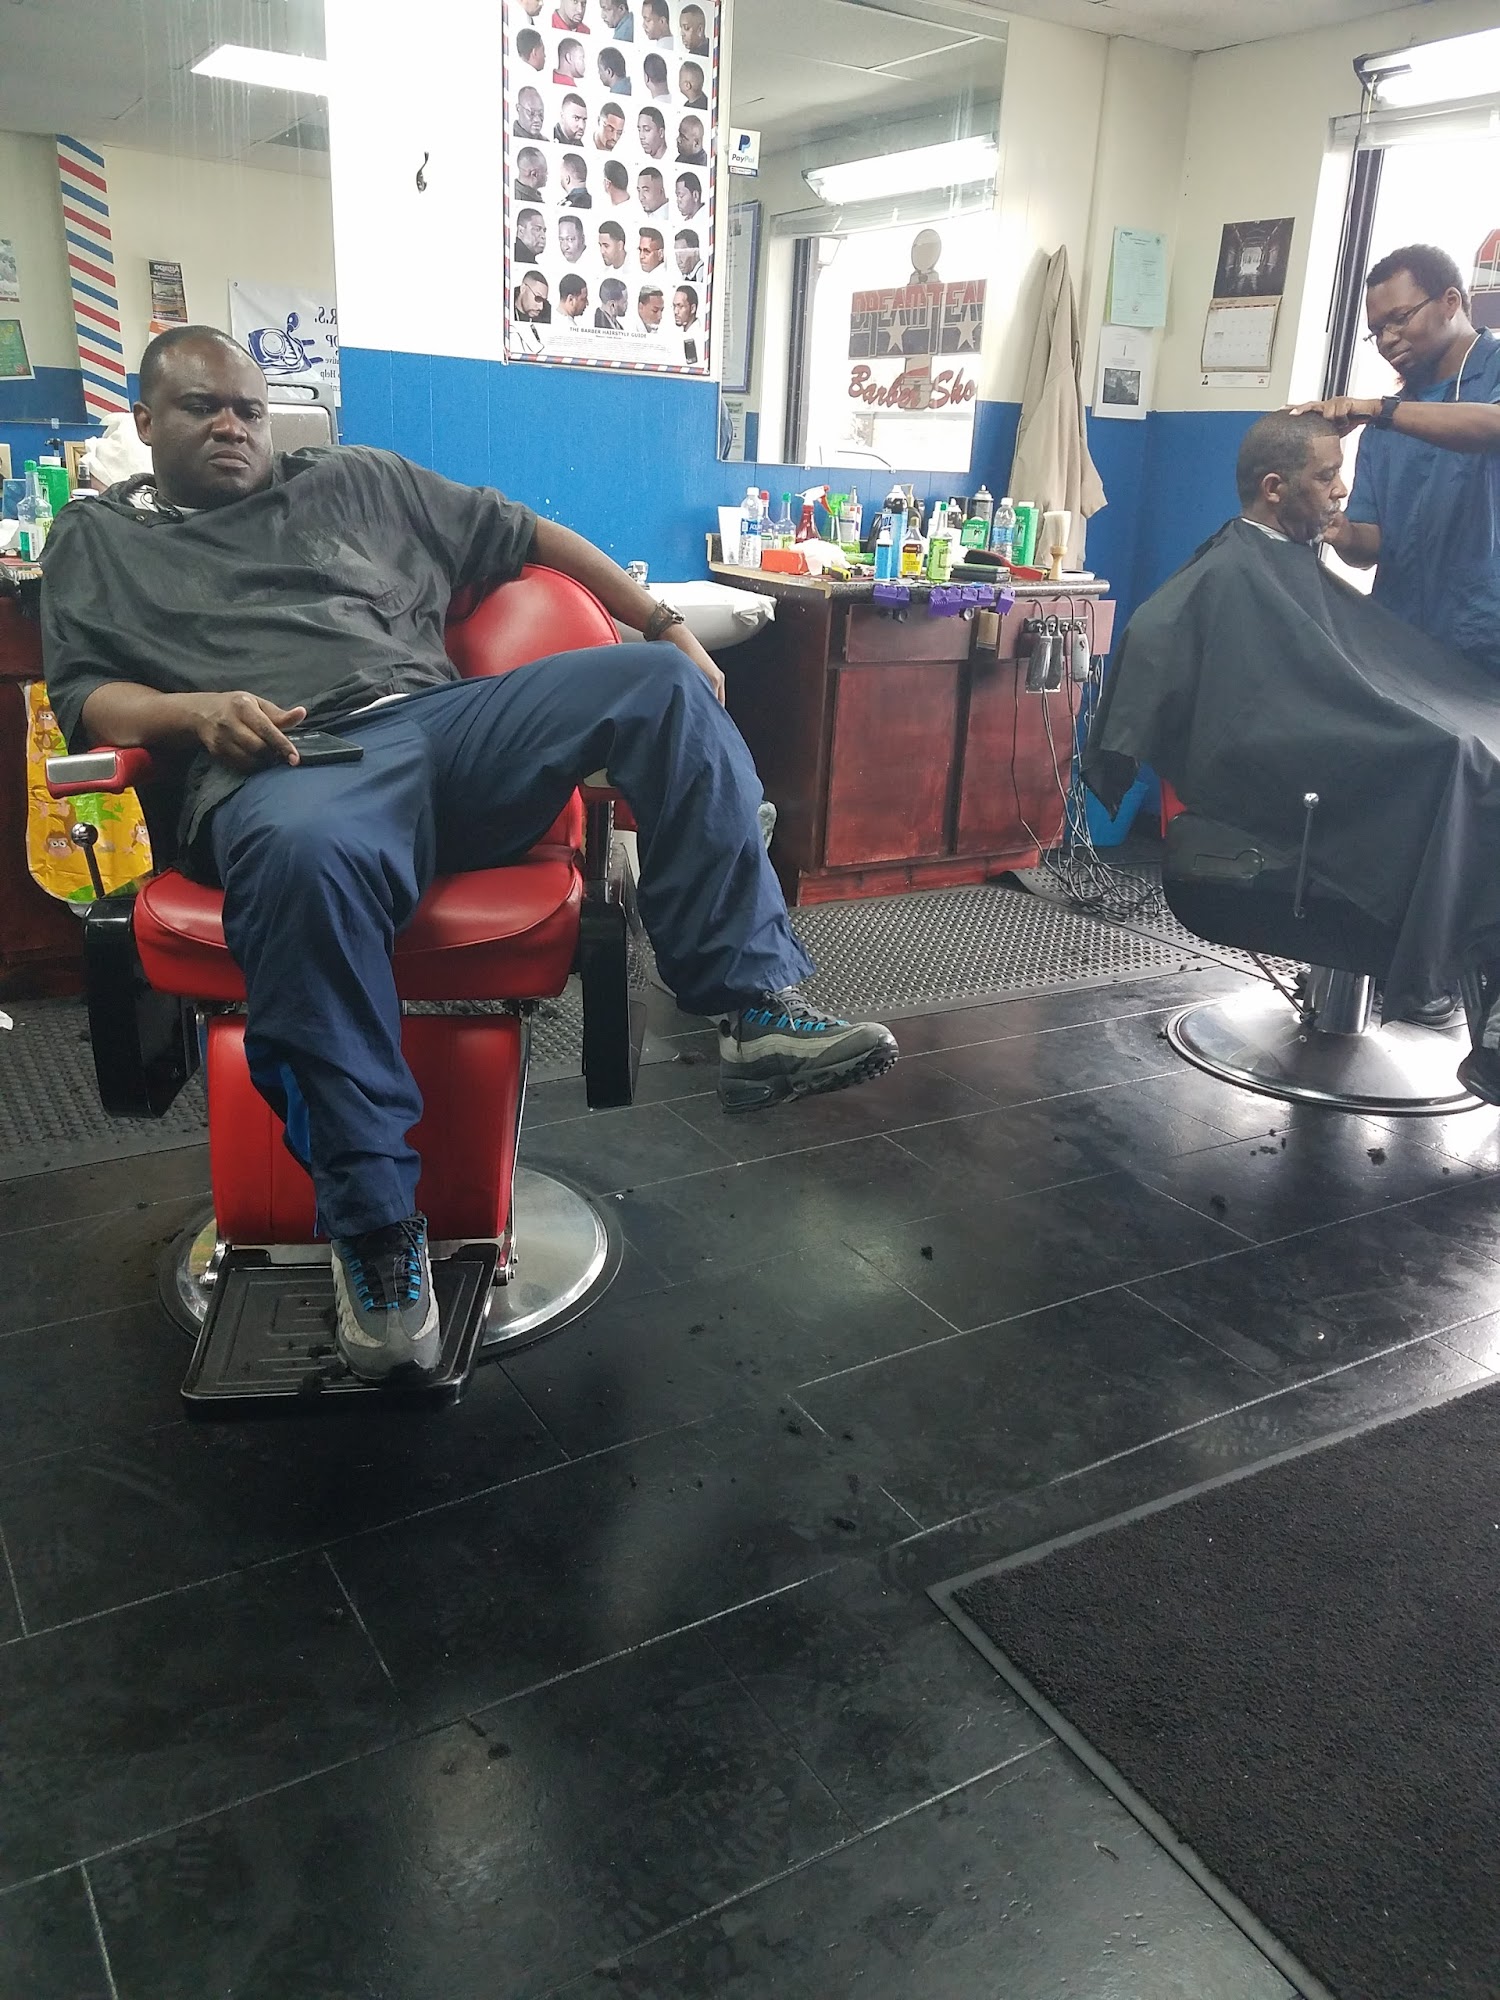 Dream Team Barbershop 703 Sycamore Ave A, Greenwood Mississippi 38930